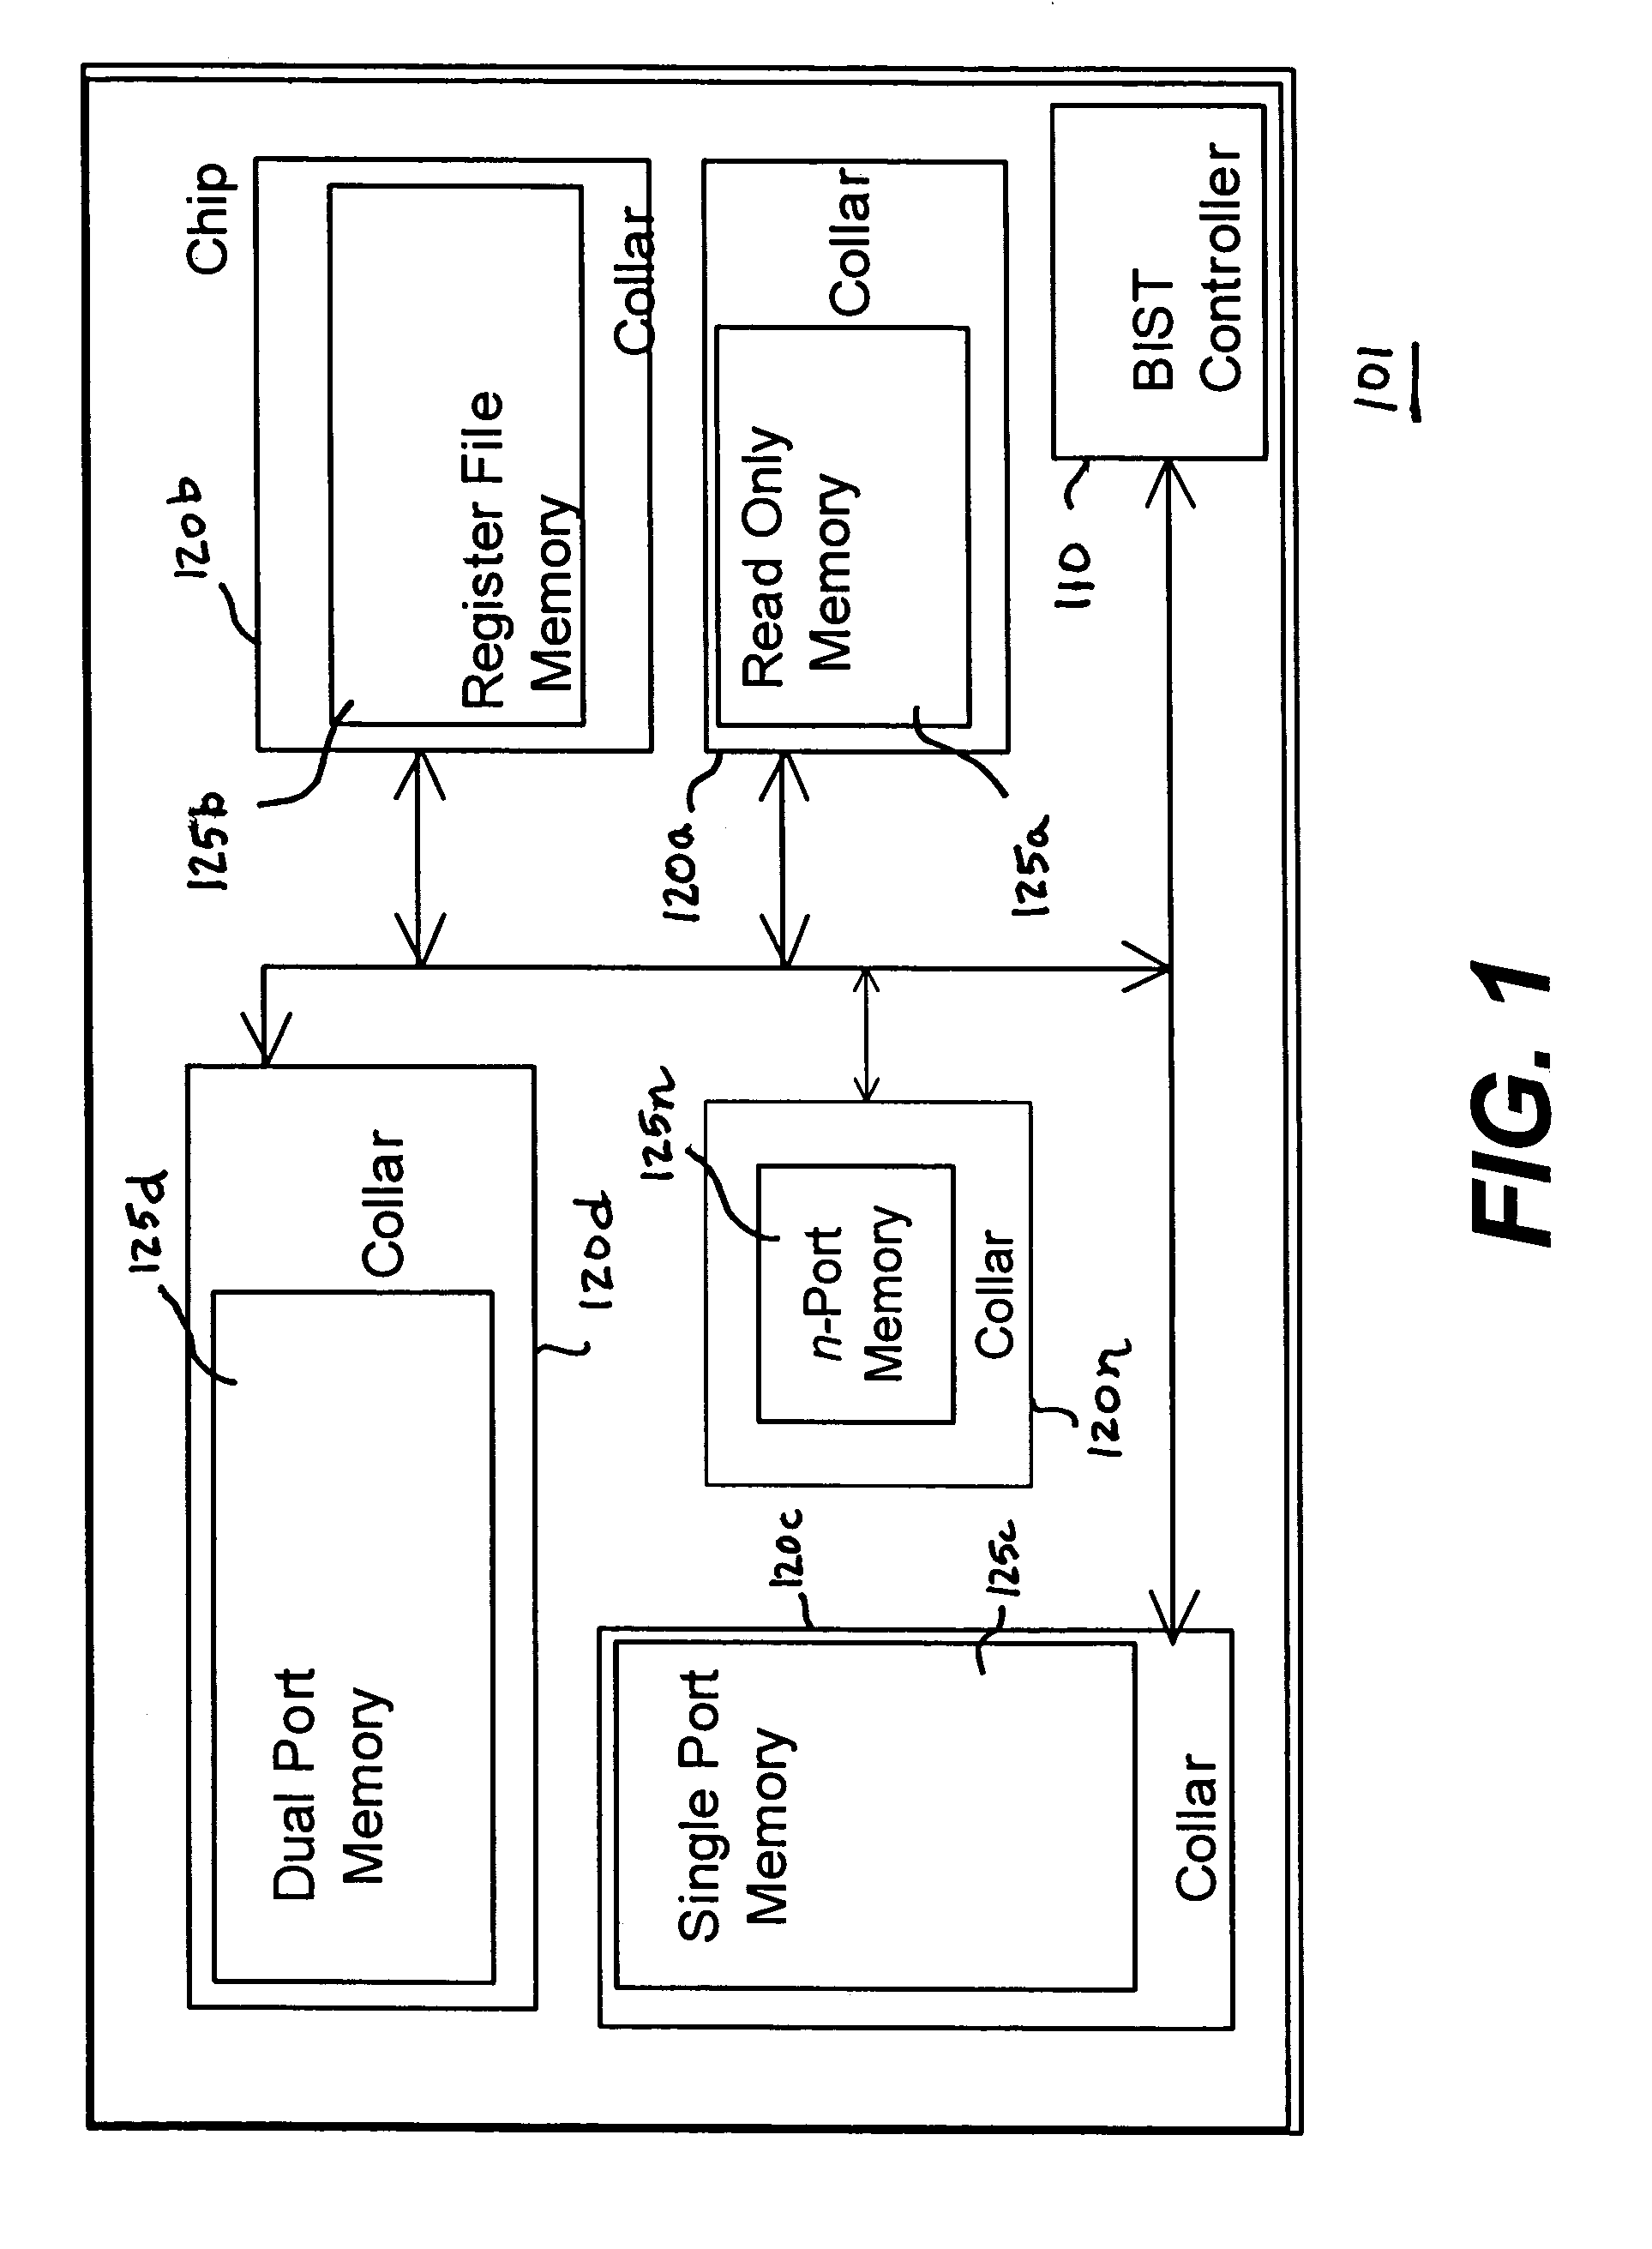 Asynchronous control of memory self test